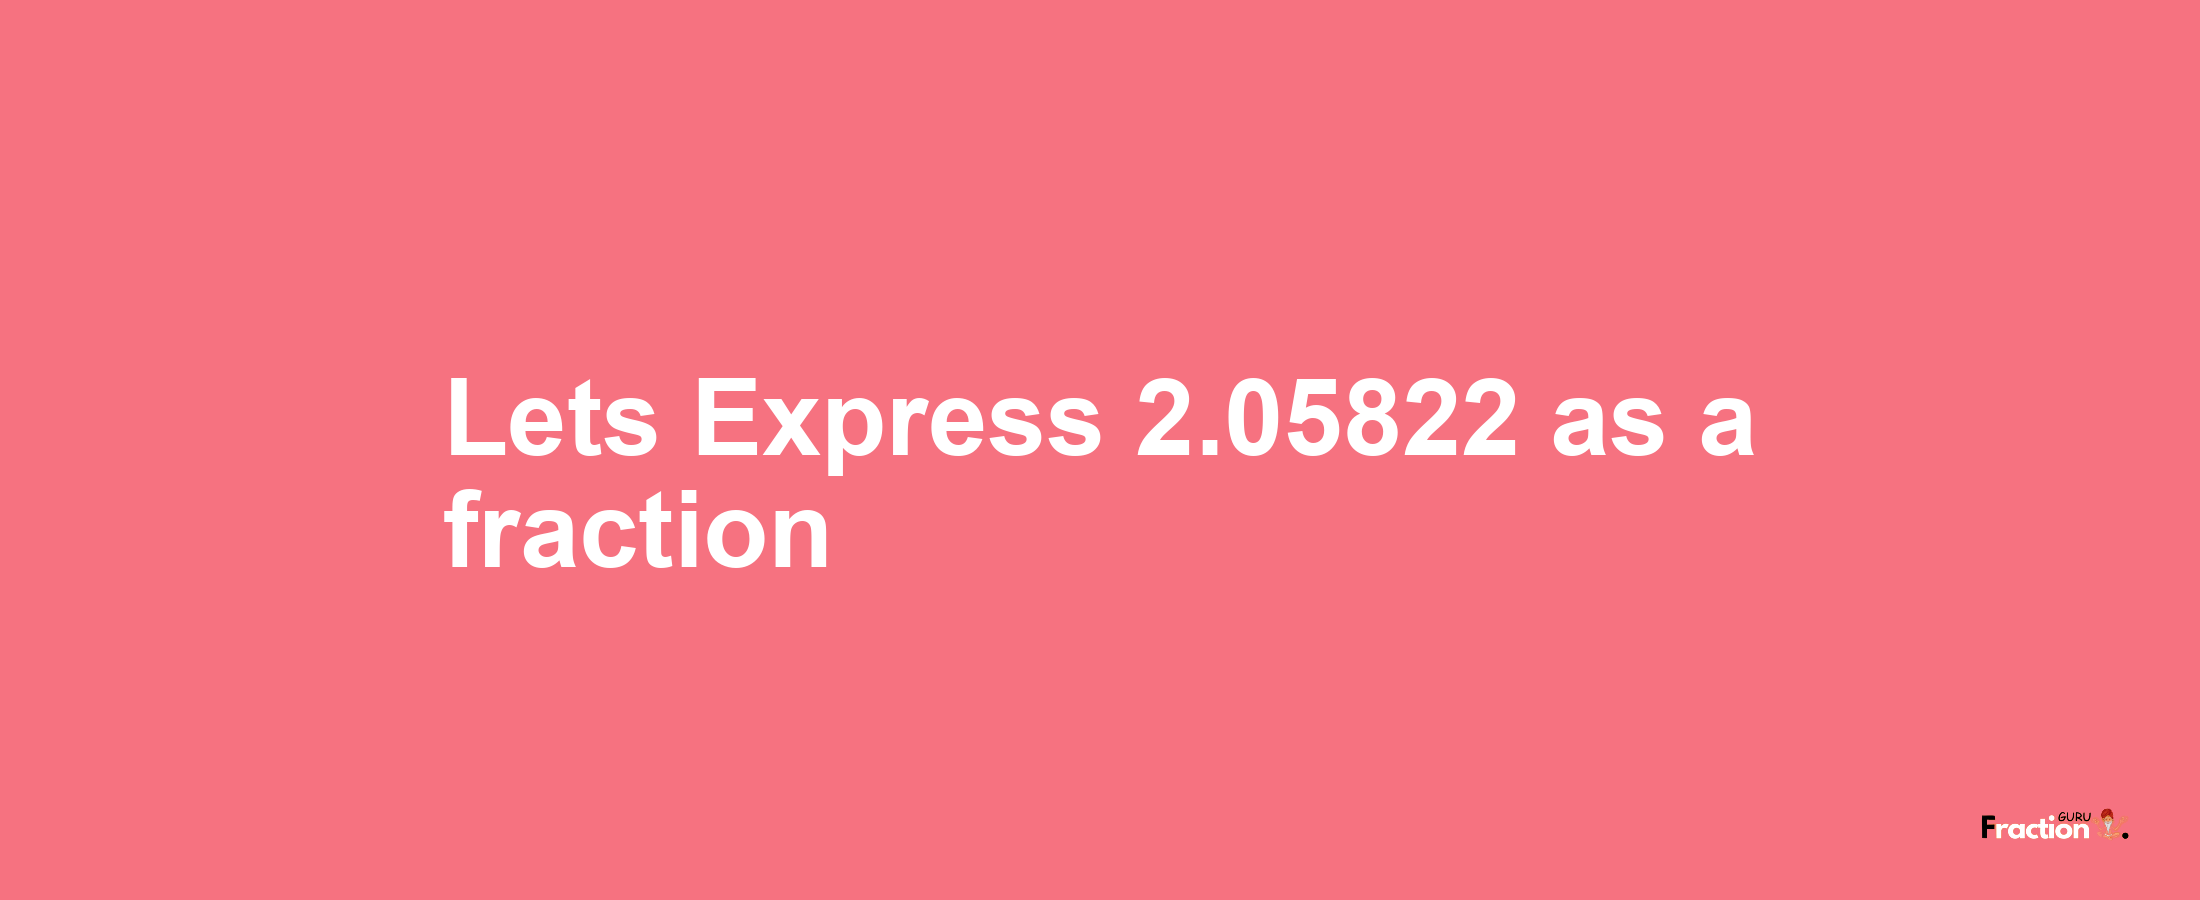 Lets Express 2.05822 as afraction